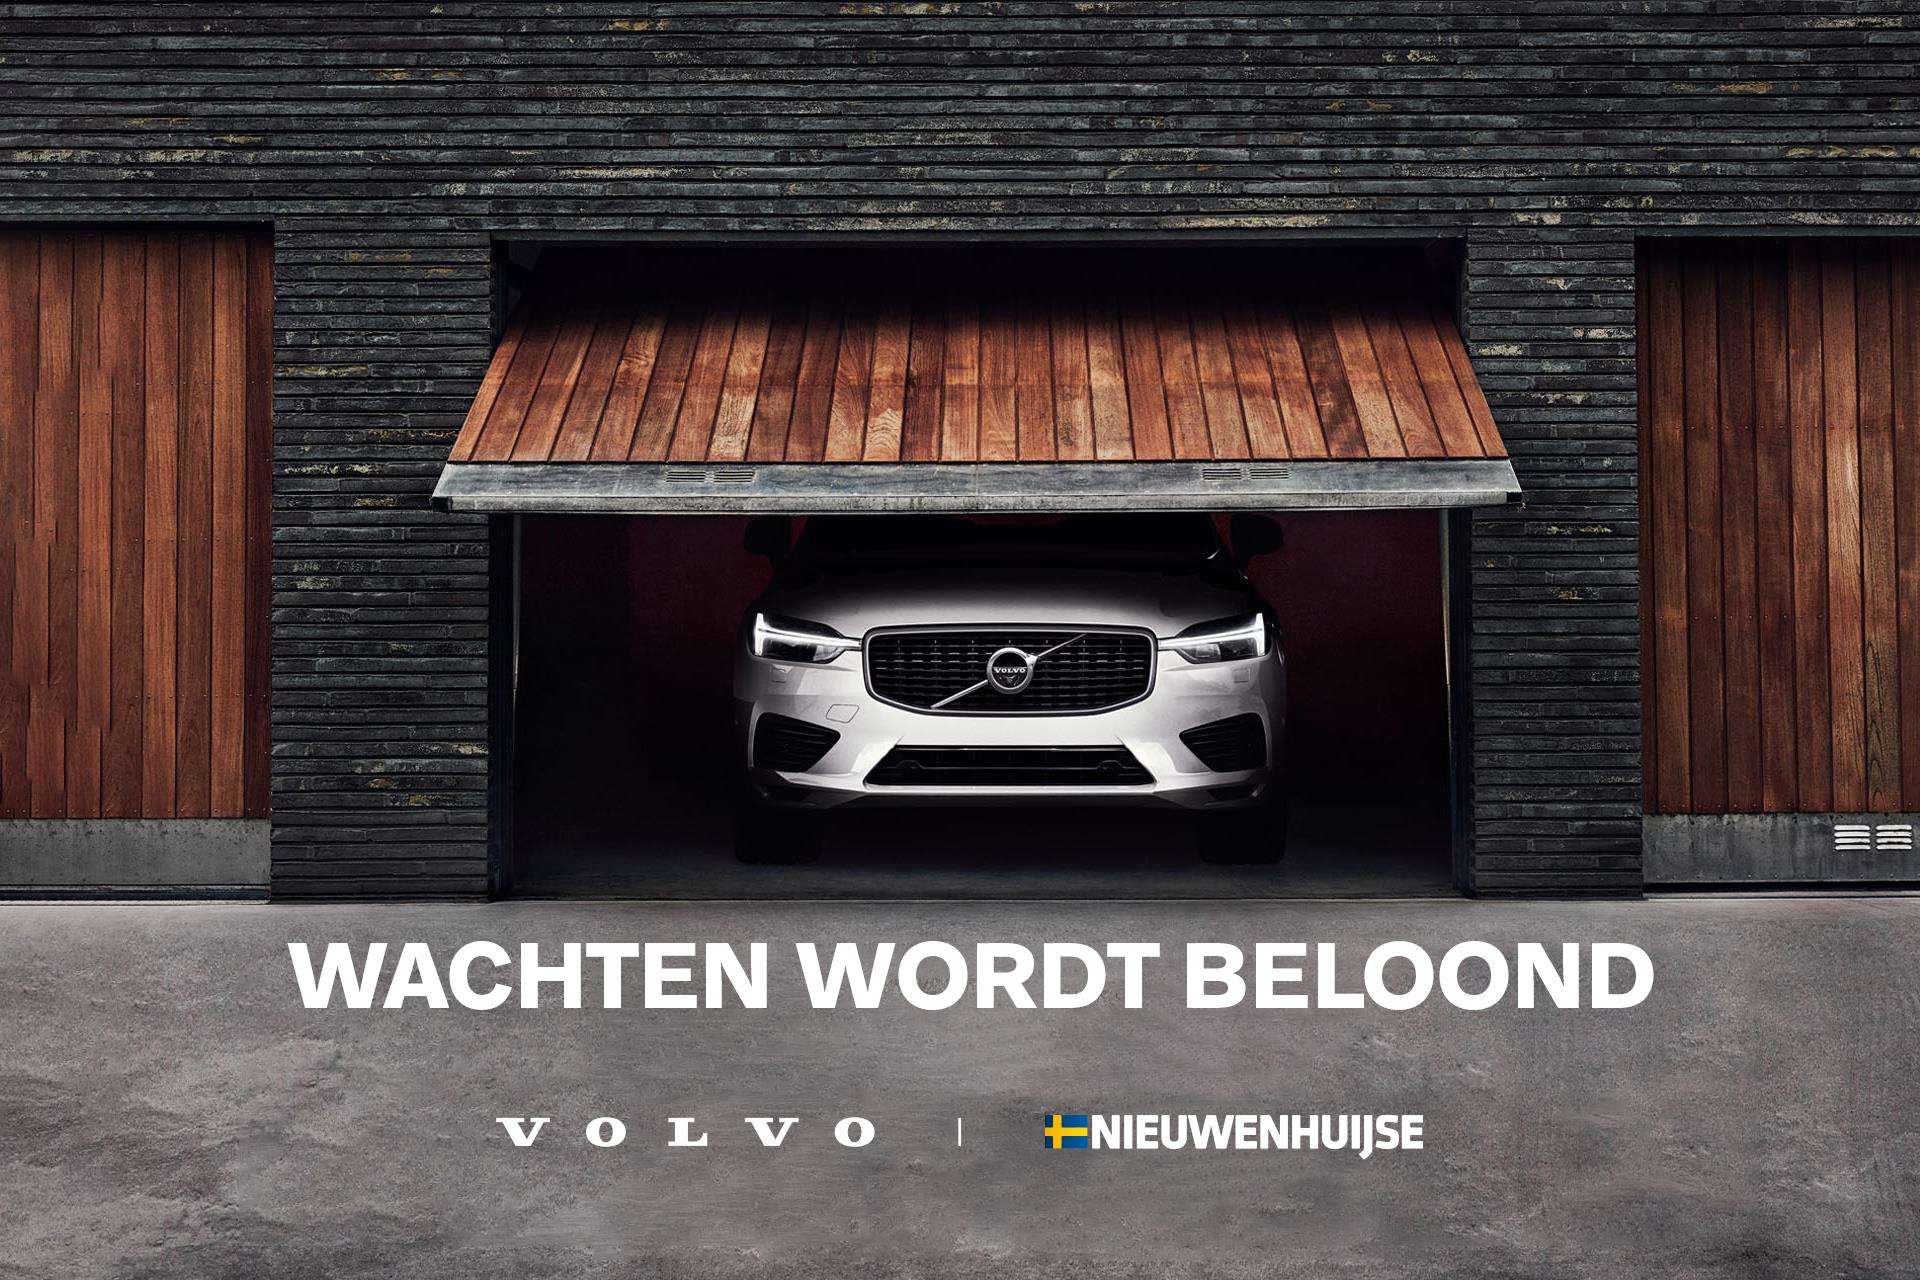 Volvo XC60 Off-Road/Pick-up in Blue used in ZWOLLE for € 75,899.-